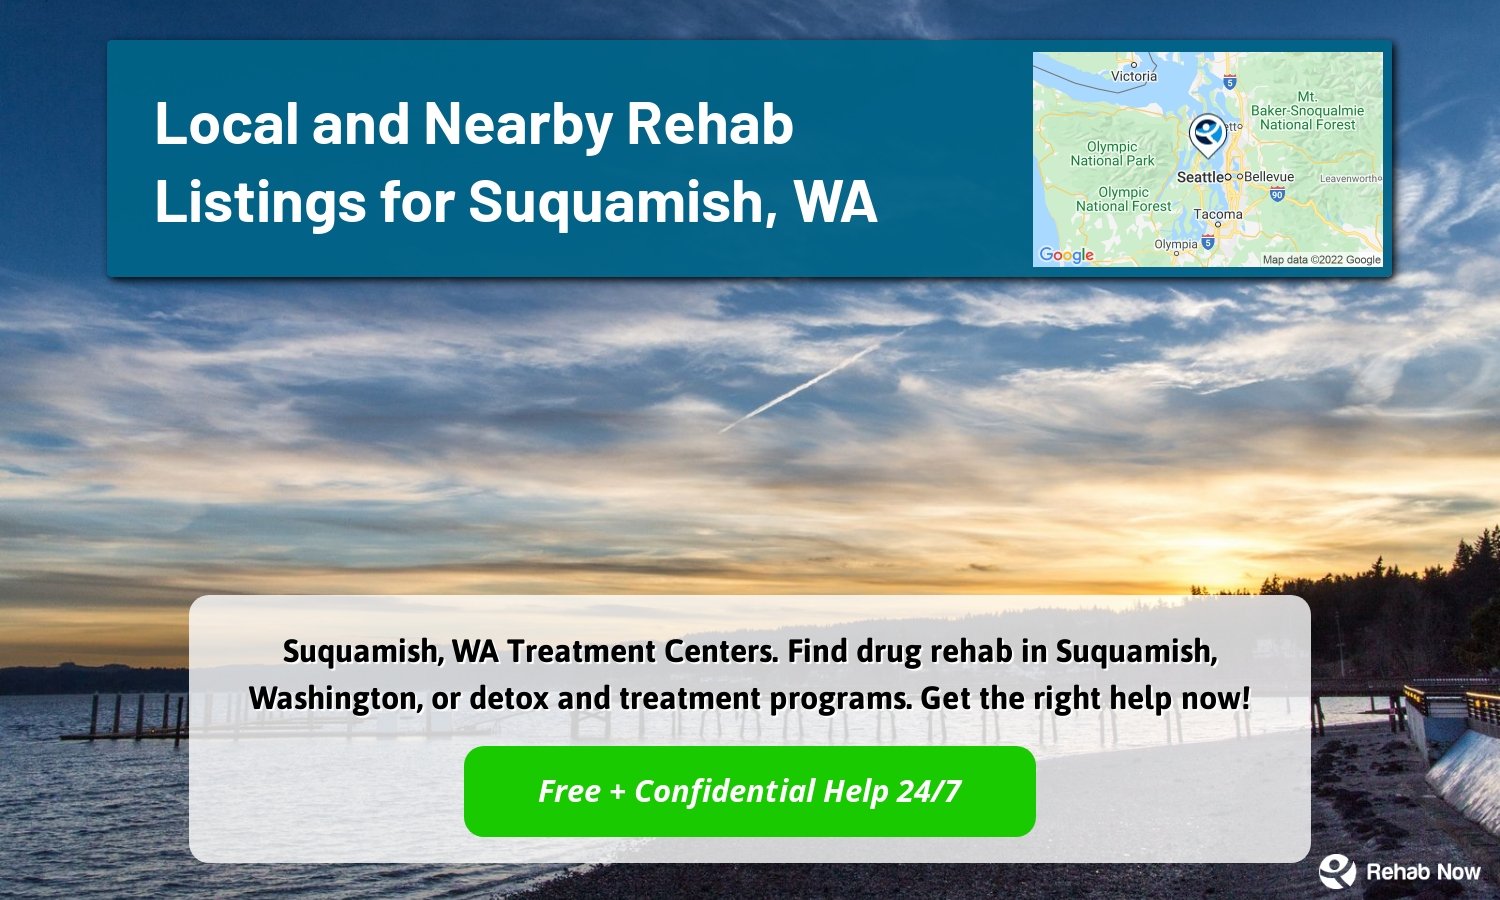 Suquamish, WA Treatment Centers. Find drug rehab in Suquamish, Washington, or detox and treatment programs. Get the right help now!